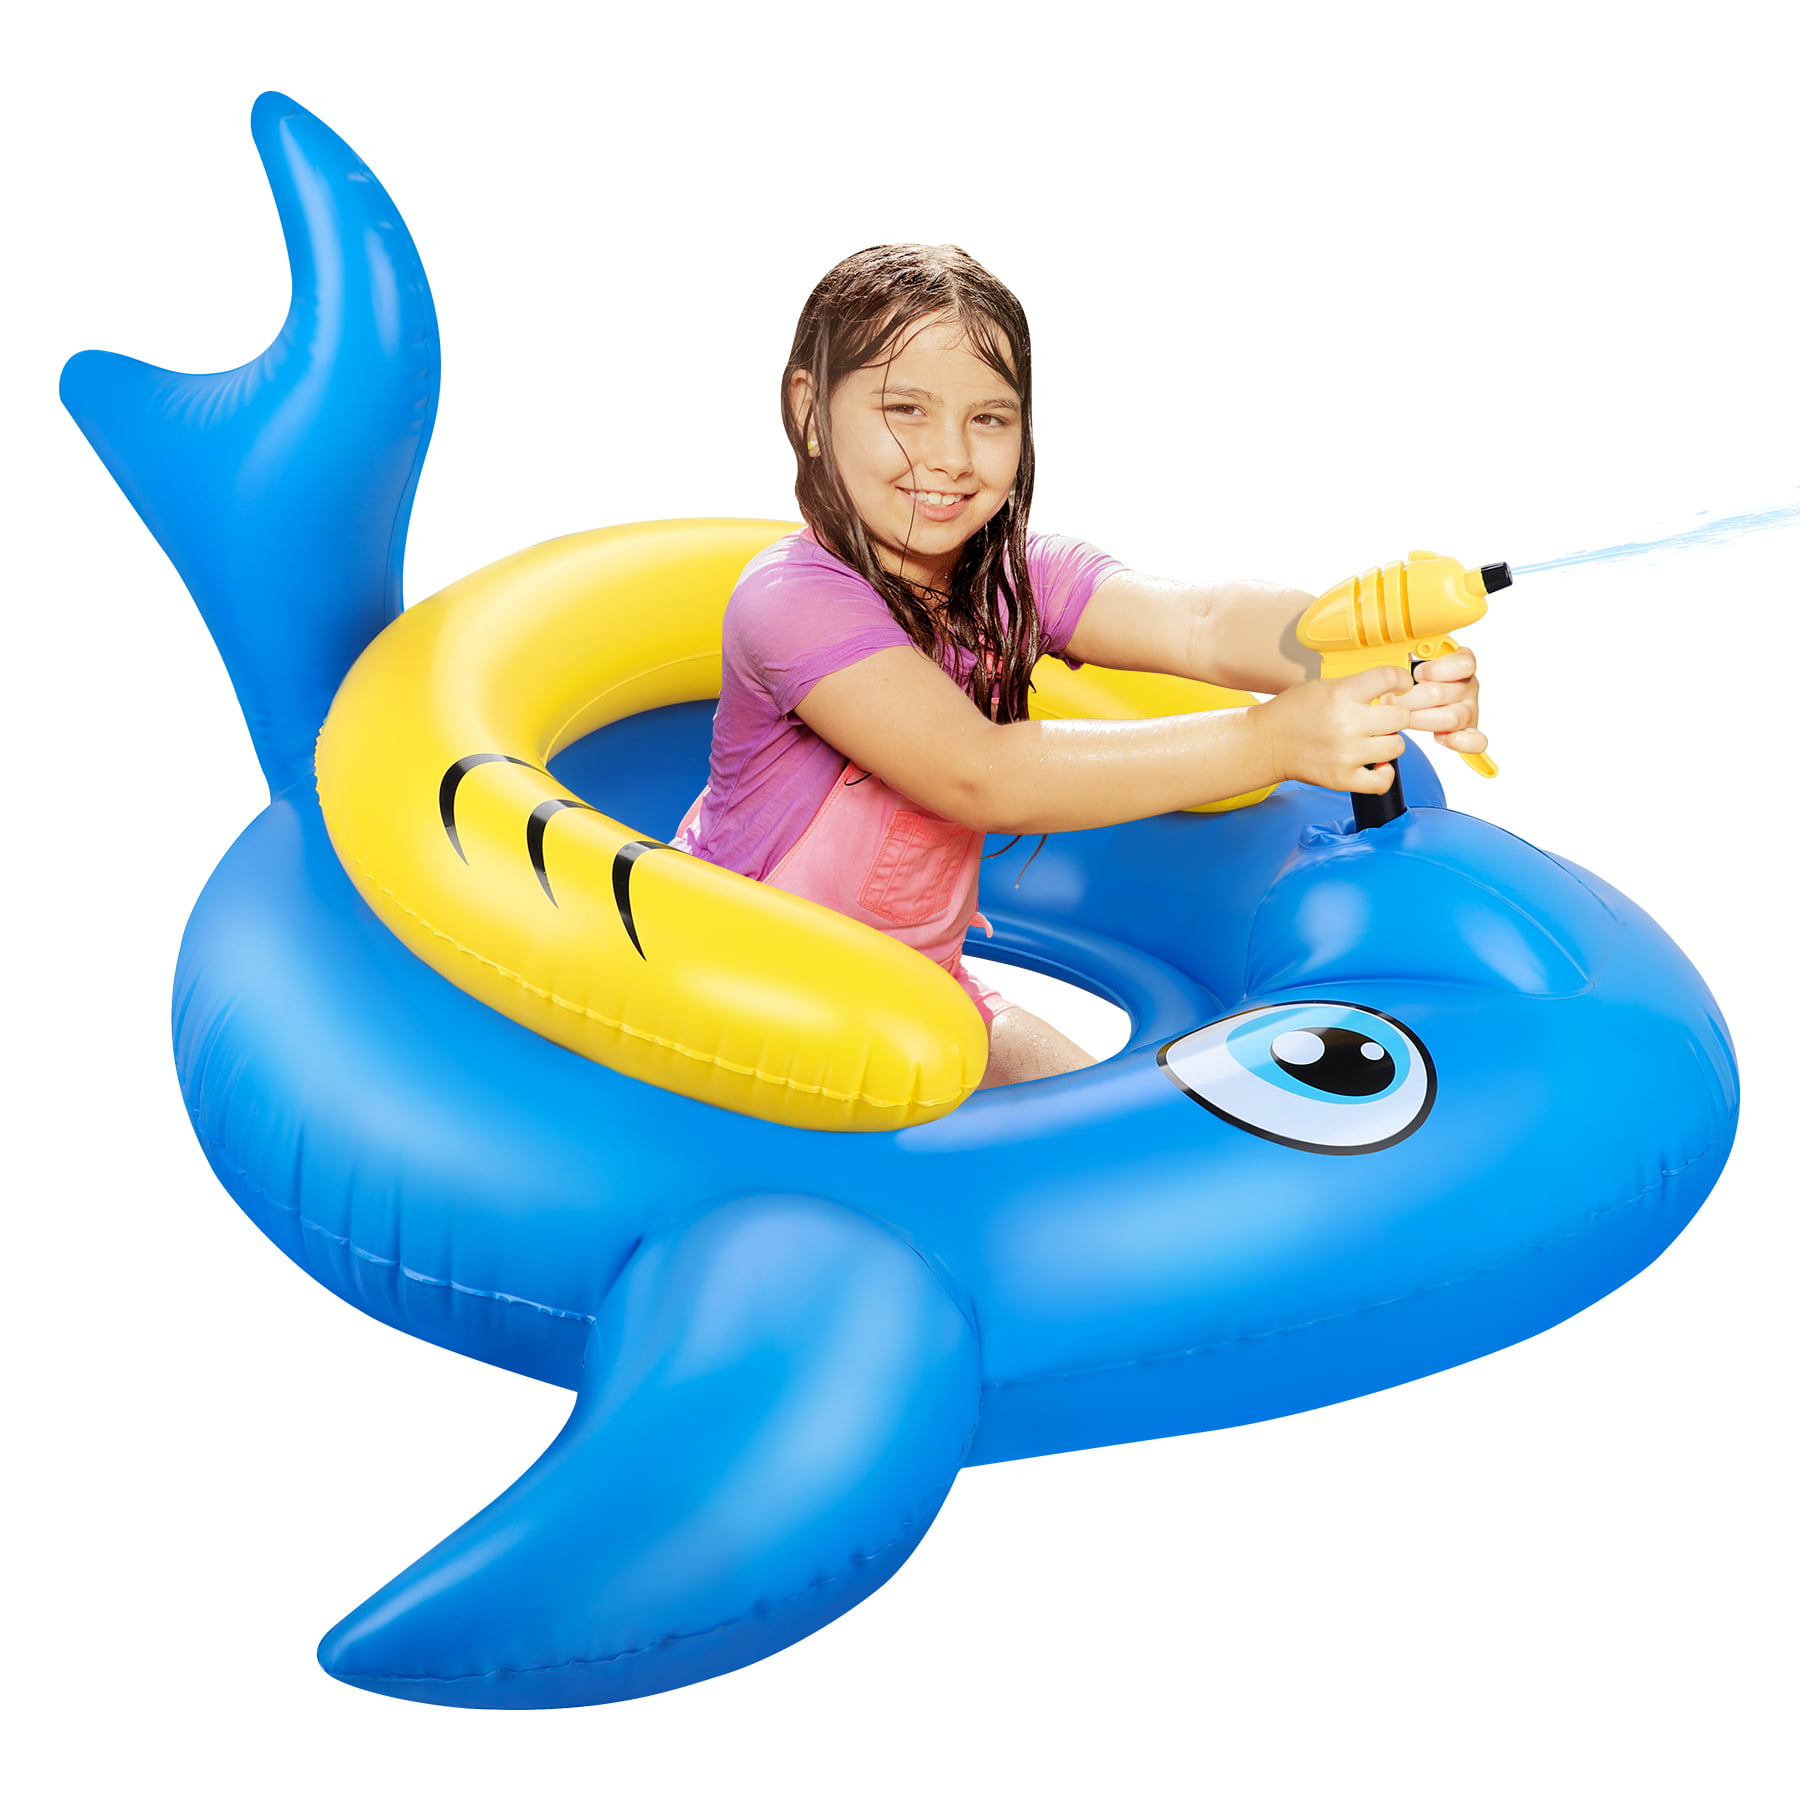 Details about   Inflatable Swimming Arm Bands Floaties Kids Pool Shark Fish or Unicorn Design 